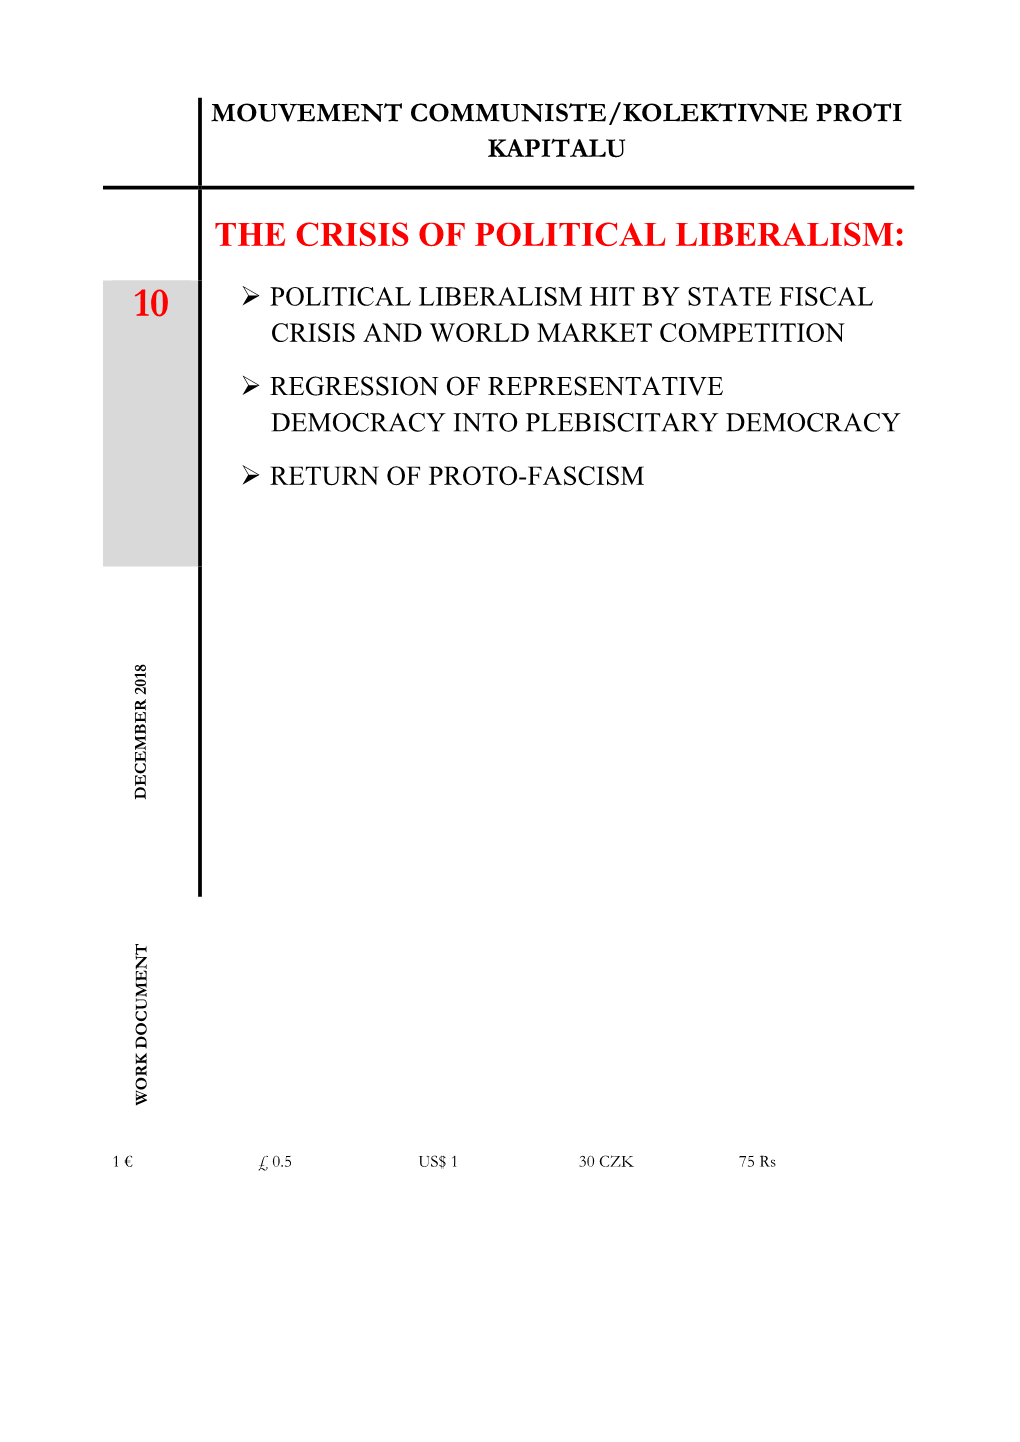 The Crisis of Political Liberalism